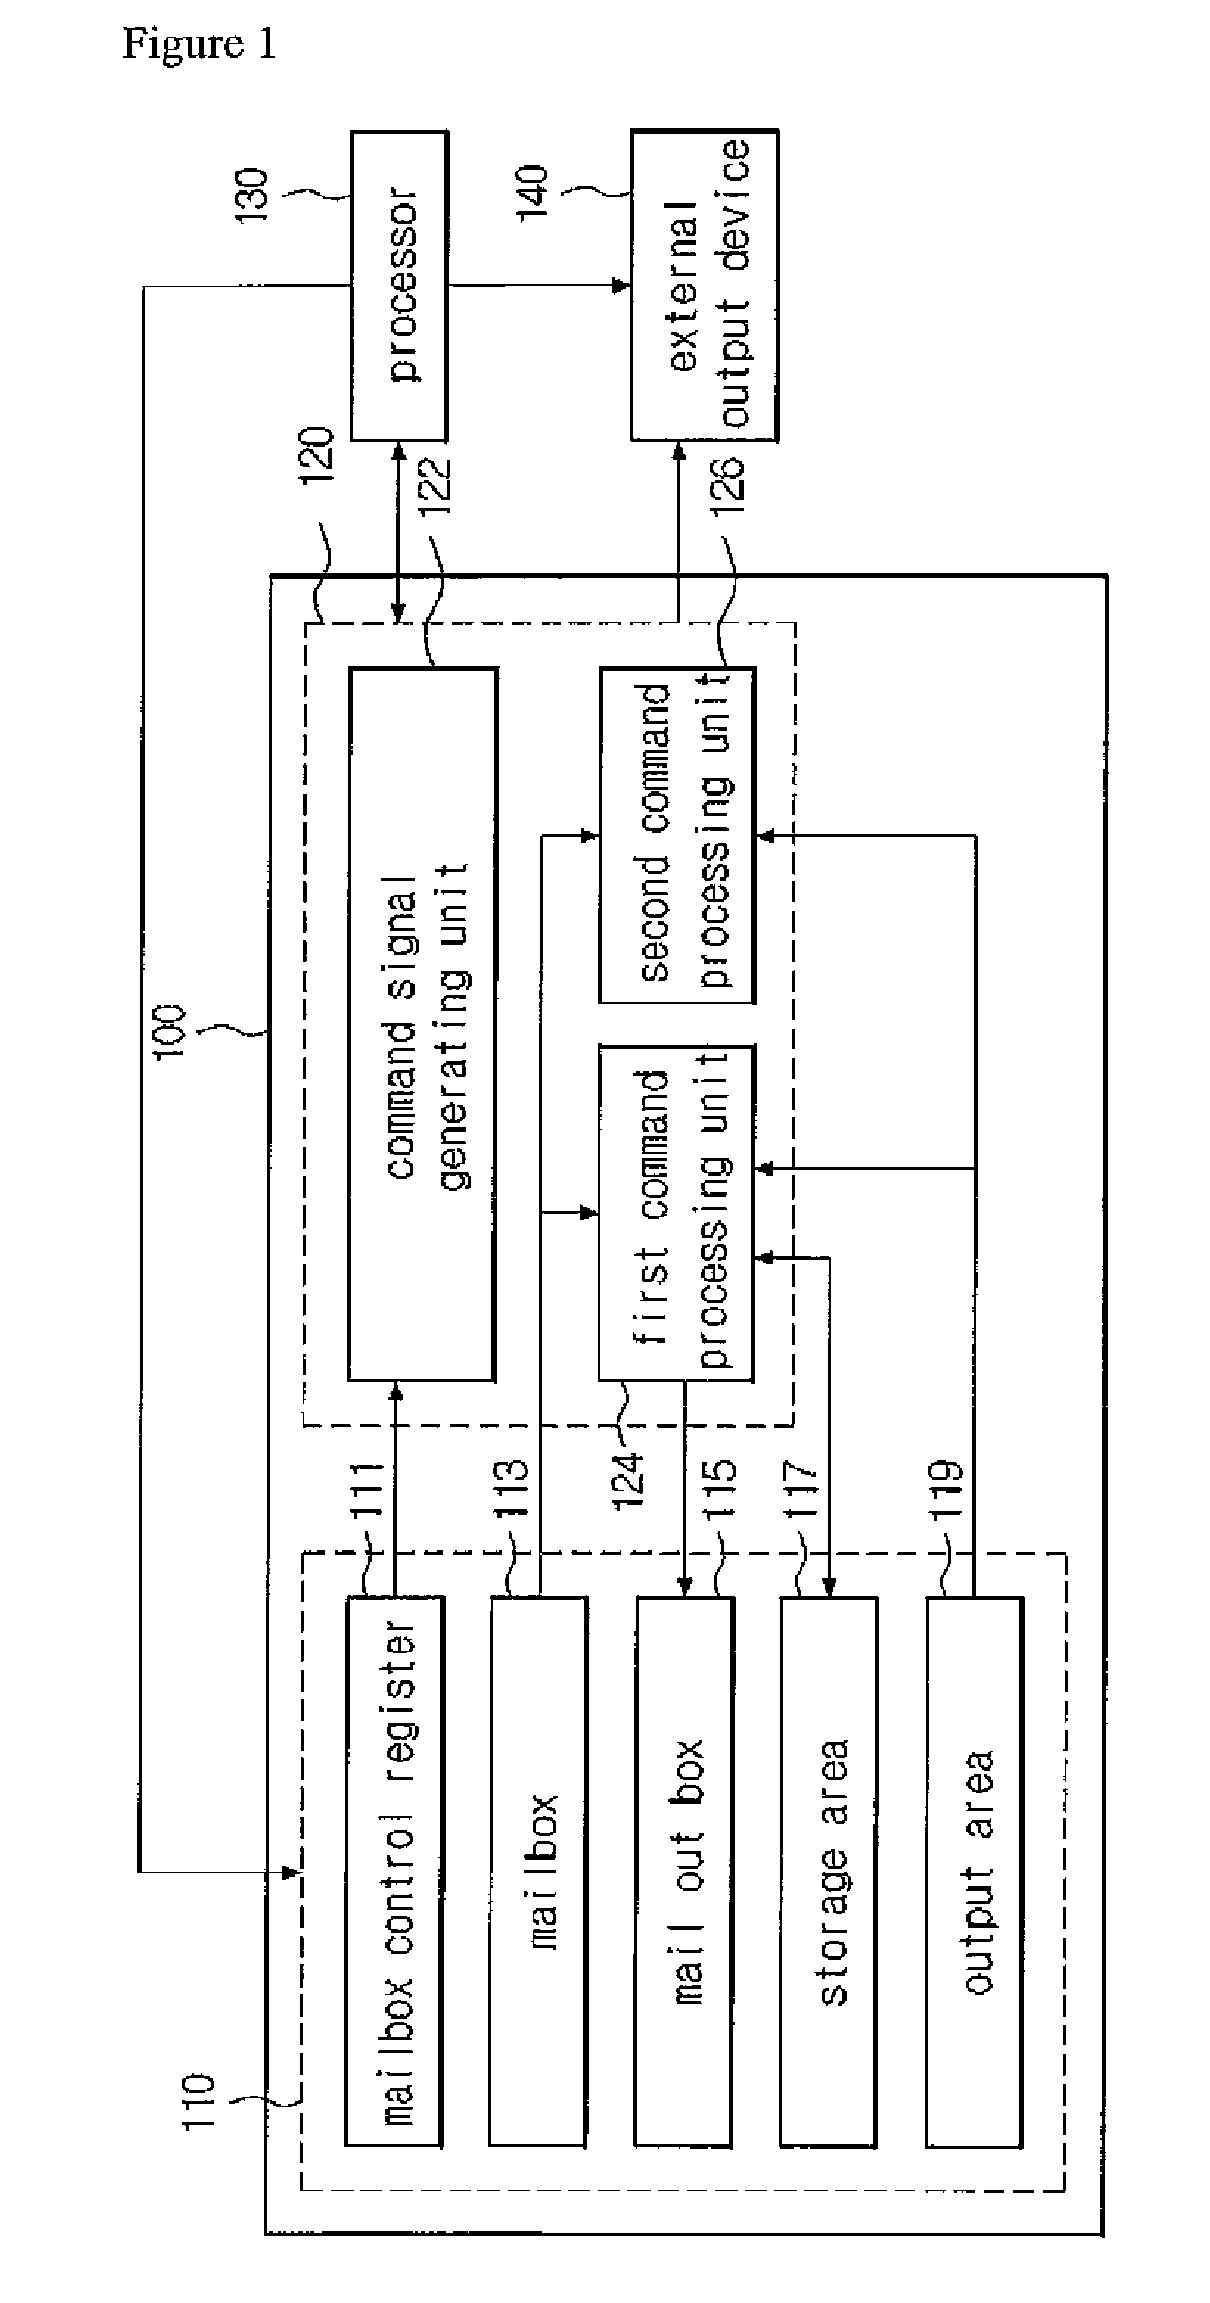 Memory device having data processing function